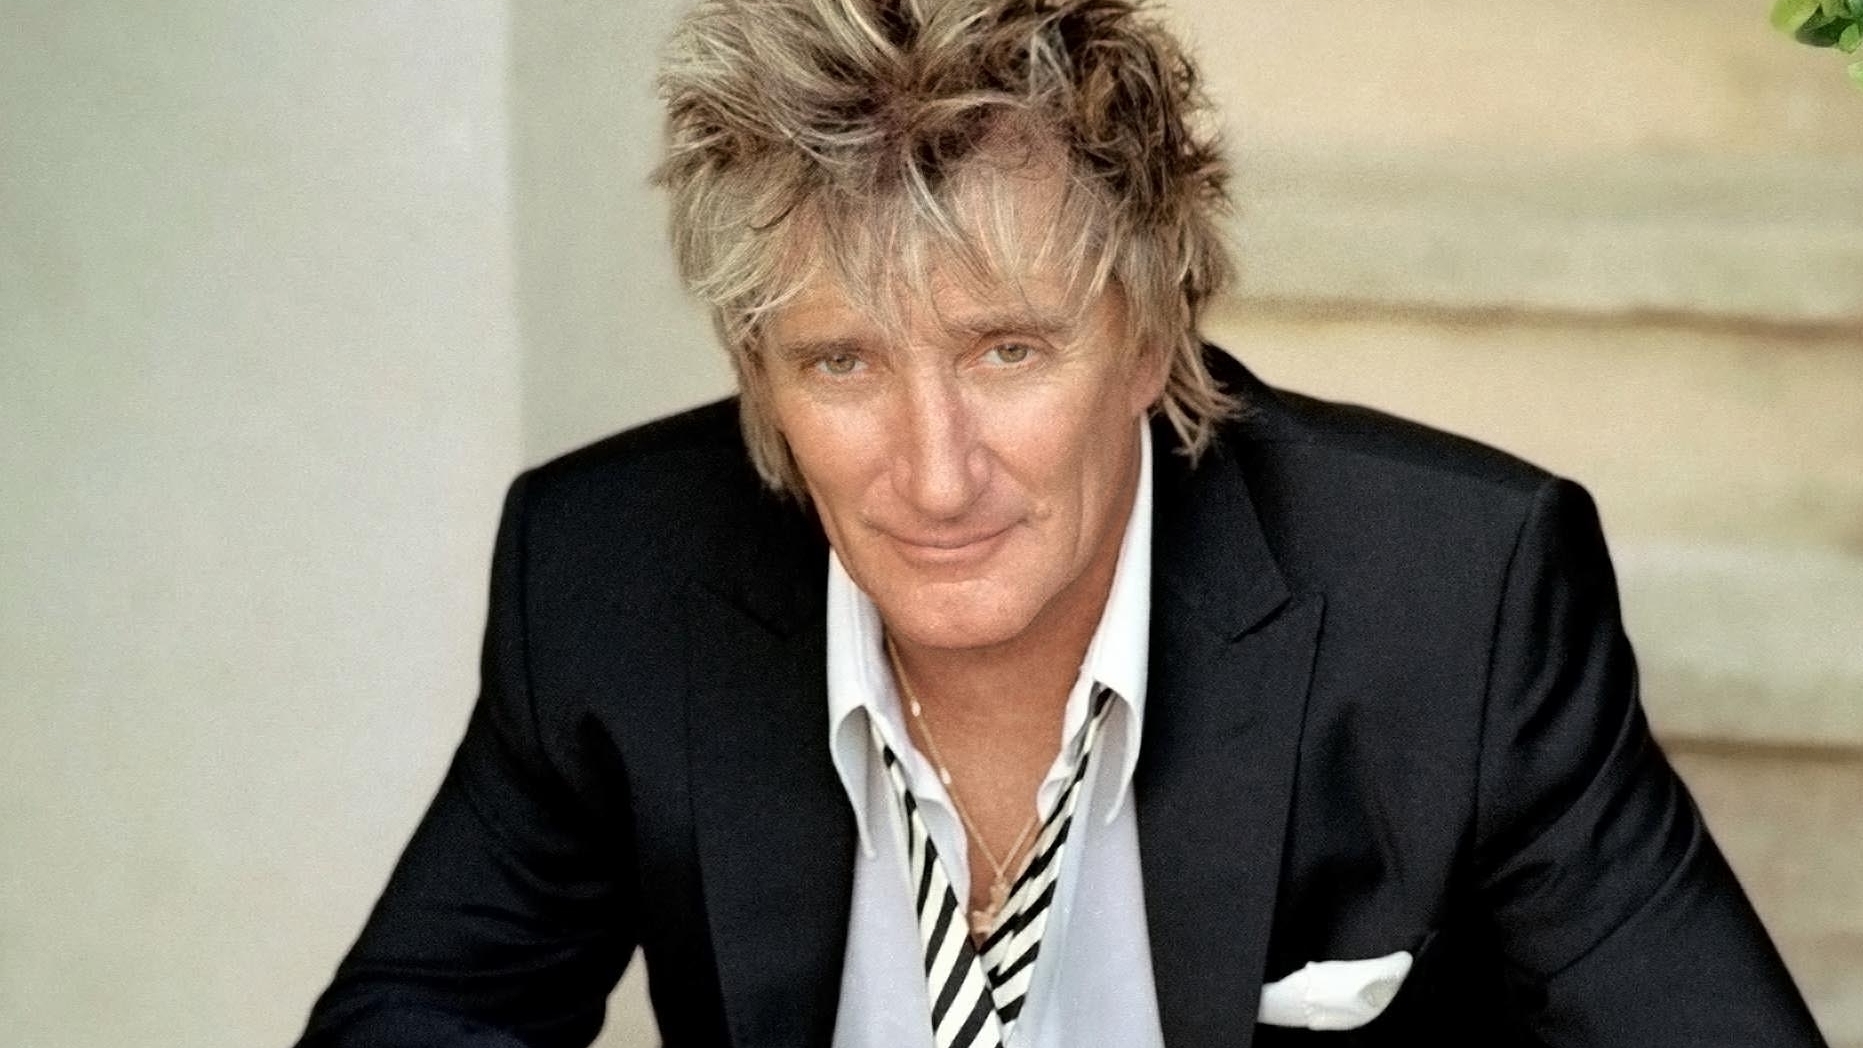 New Live Nation deal brings Rod Stewart to Australia in 2020